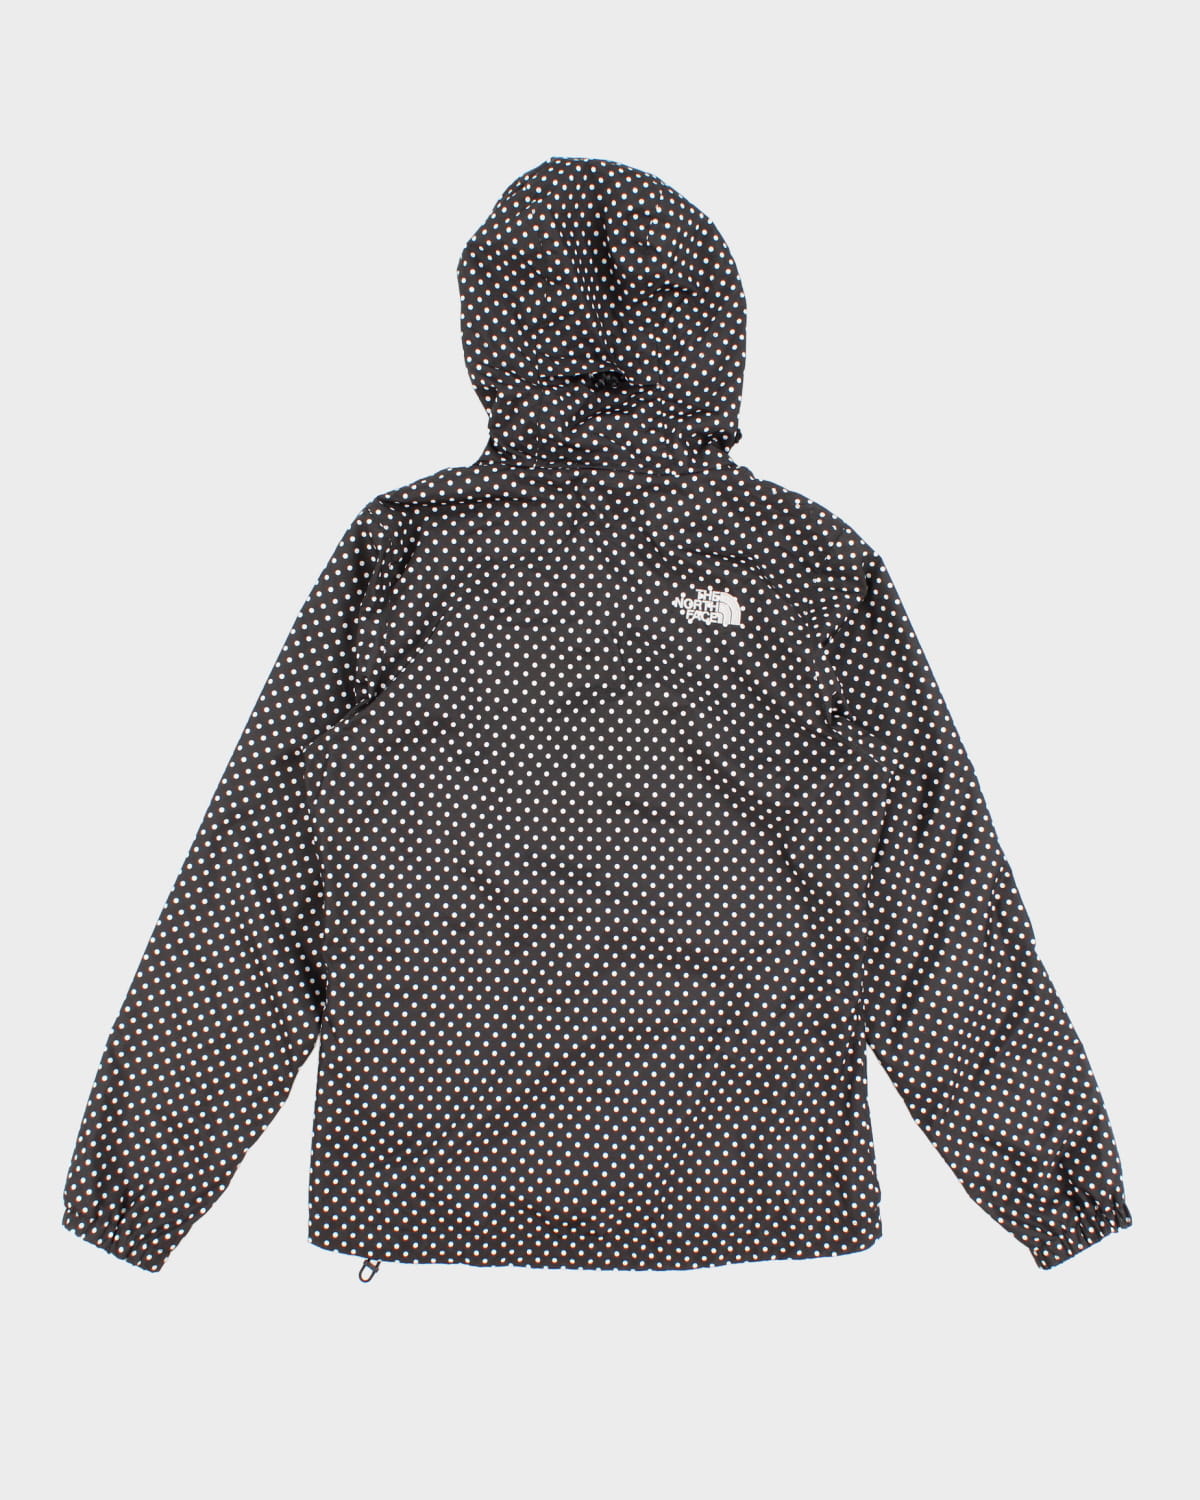 The North Face Women's Polka Dot Hooded Jacket - XS